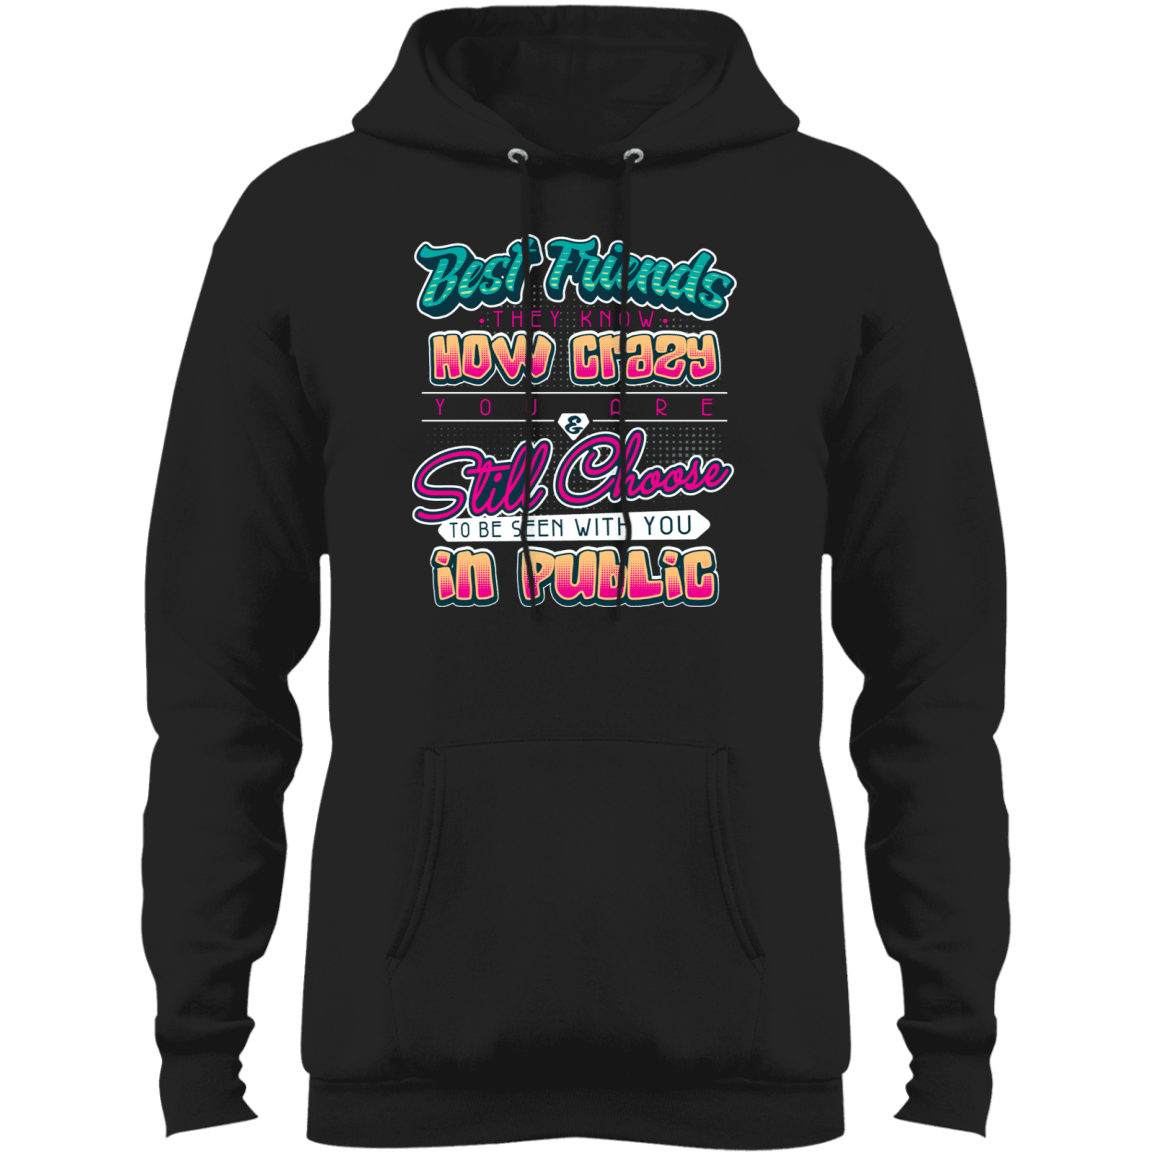 Designs by MyUtopia Shout Out:Best Friends They Know How Crazy You Are Core Fleece Pullover Hoodie,Jet Black / S,Sweatshirts